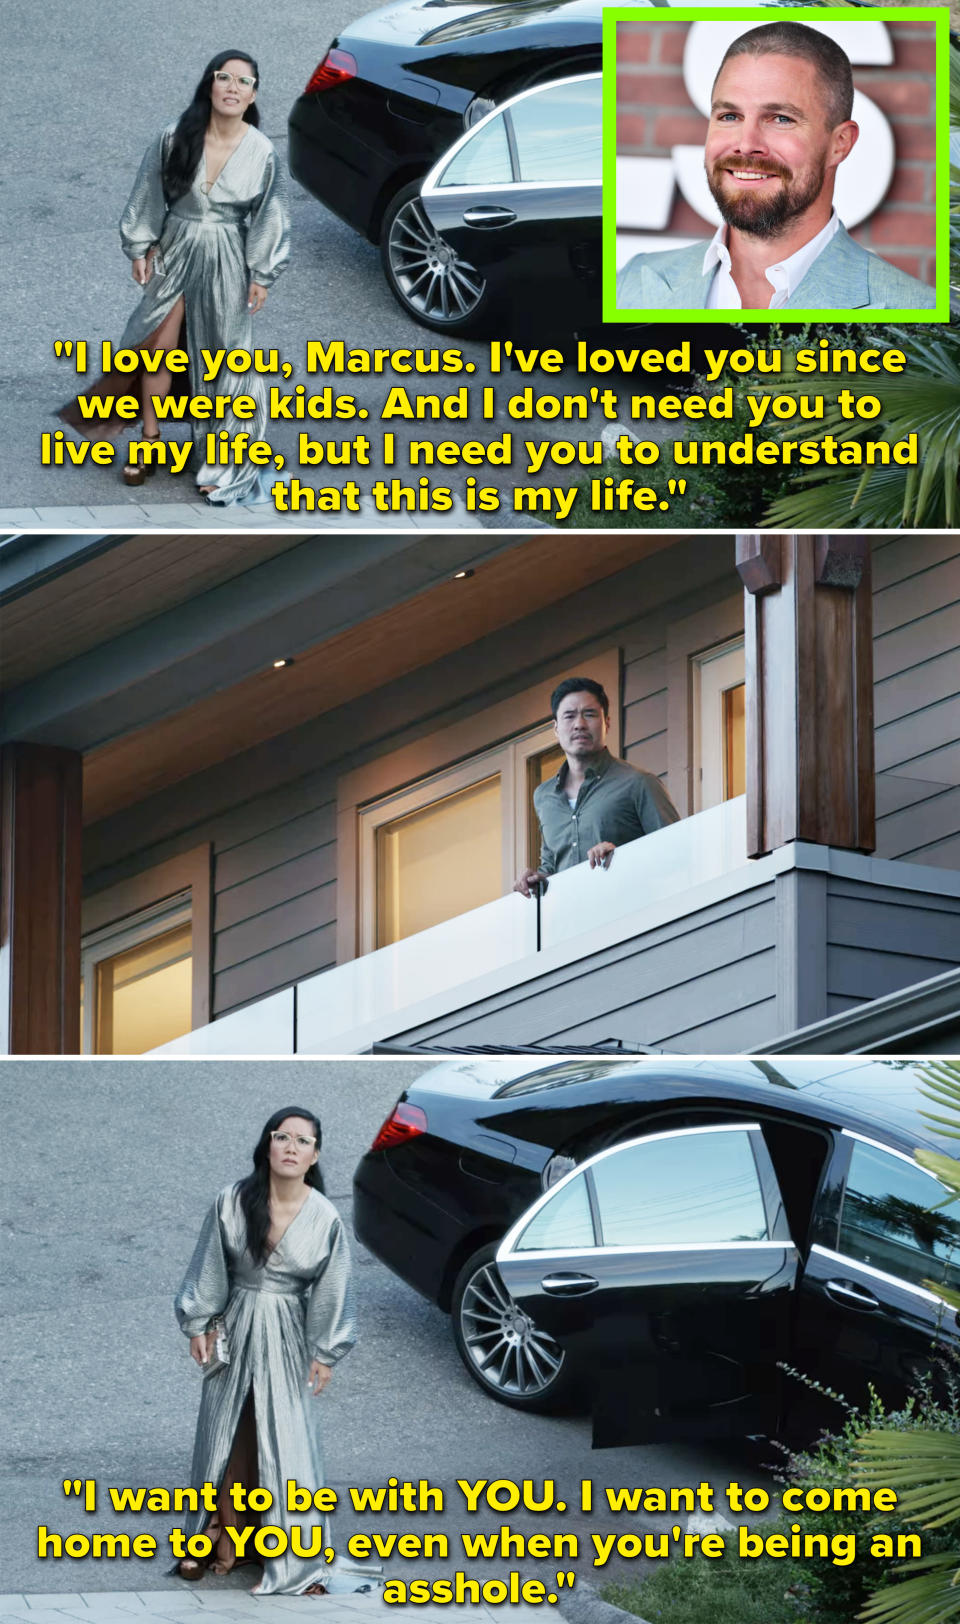 Sasha saying, "I love you, Marcus; I've loved you since we were kids — and I don't need you to live my life, but I need you to understand that this is my life"